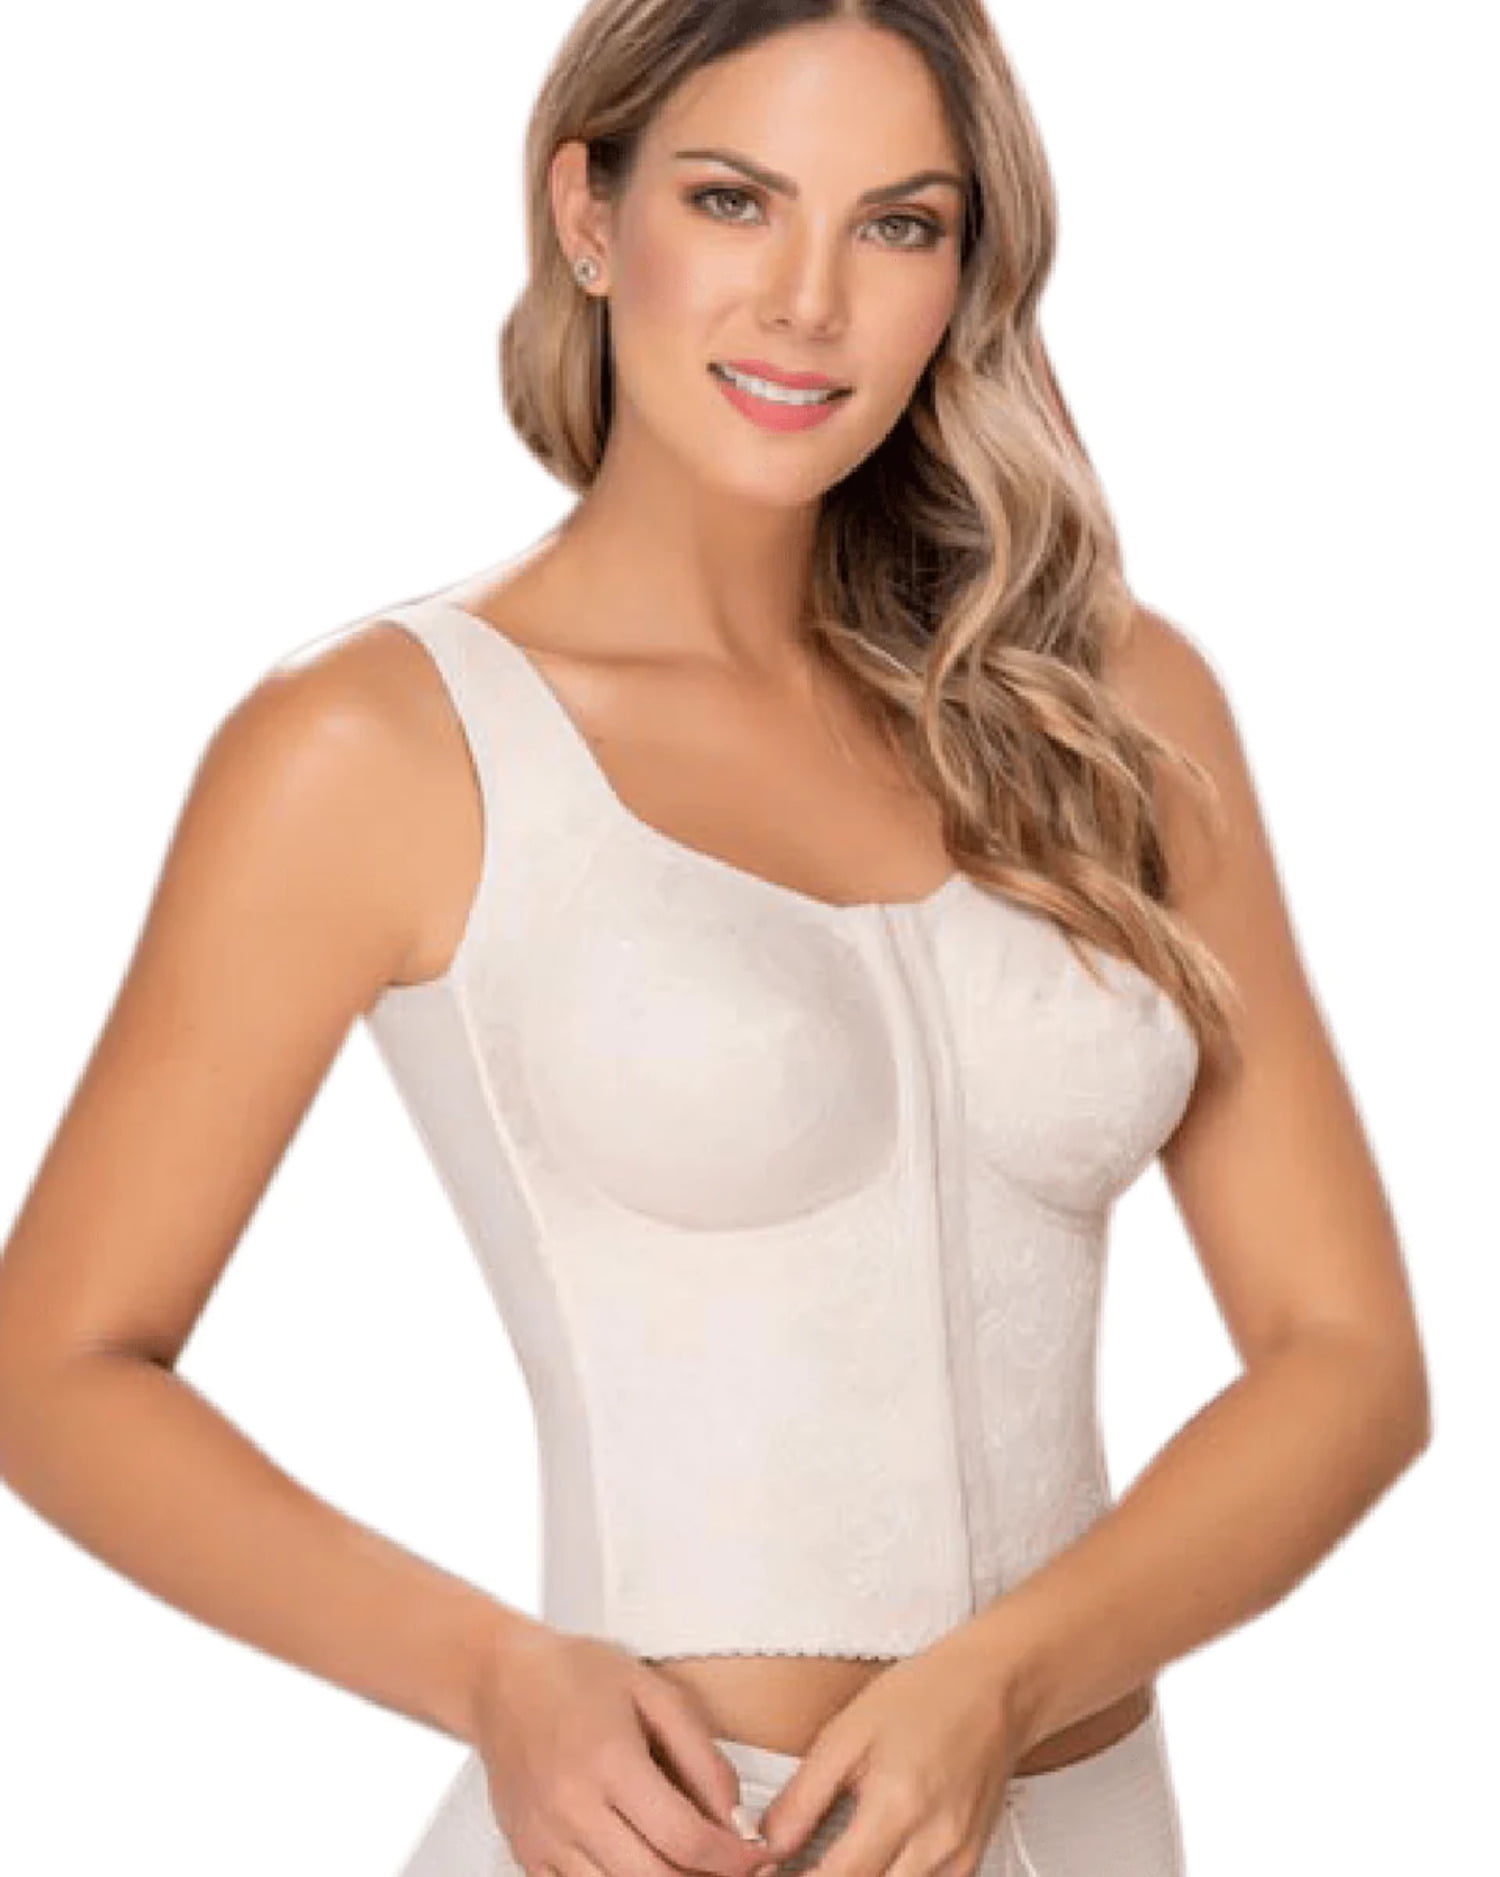 TOMMIE COPPER Womens White Shoulder Support Comfort Bra, XX-Large